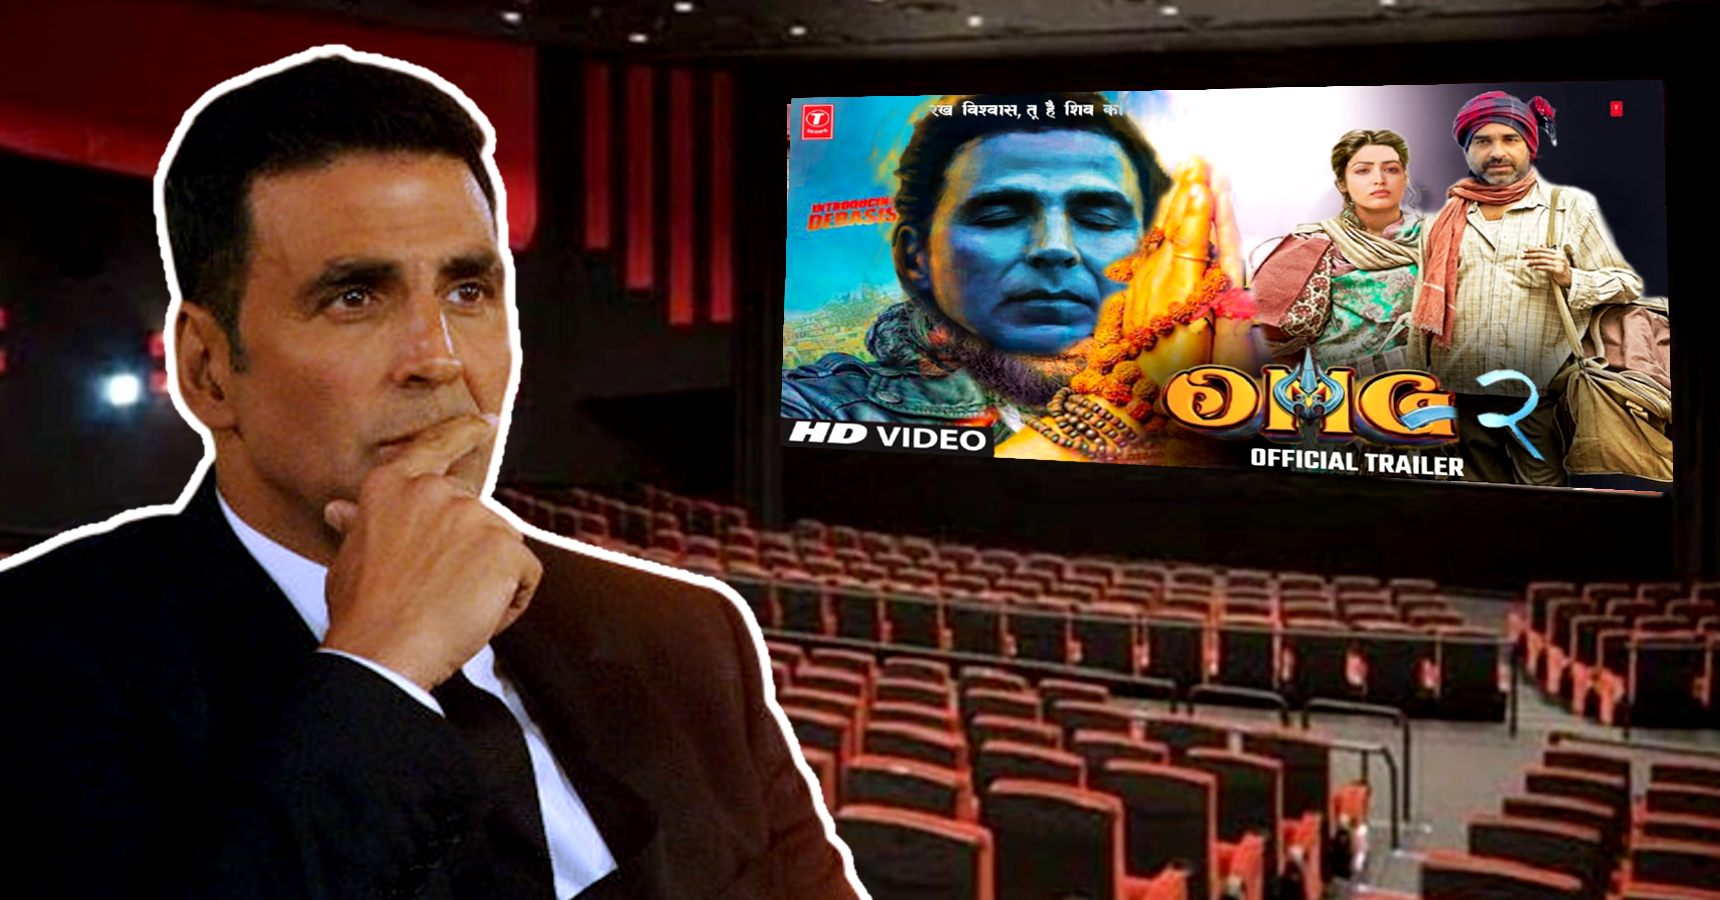 Akshay Kumar Oh My God 2 movie will be released on OTT not in theater big decesion by film makers